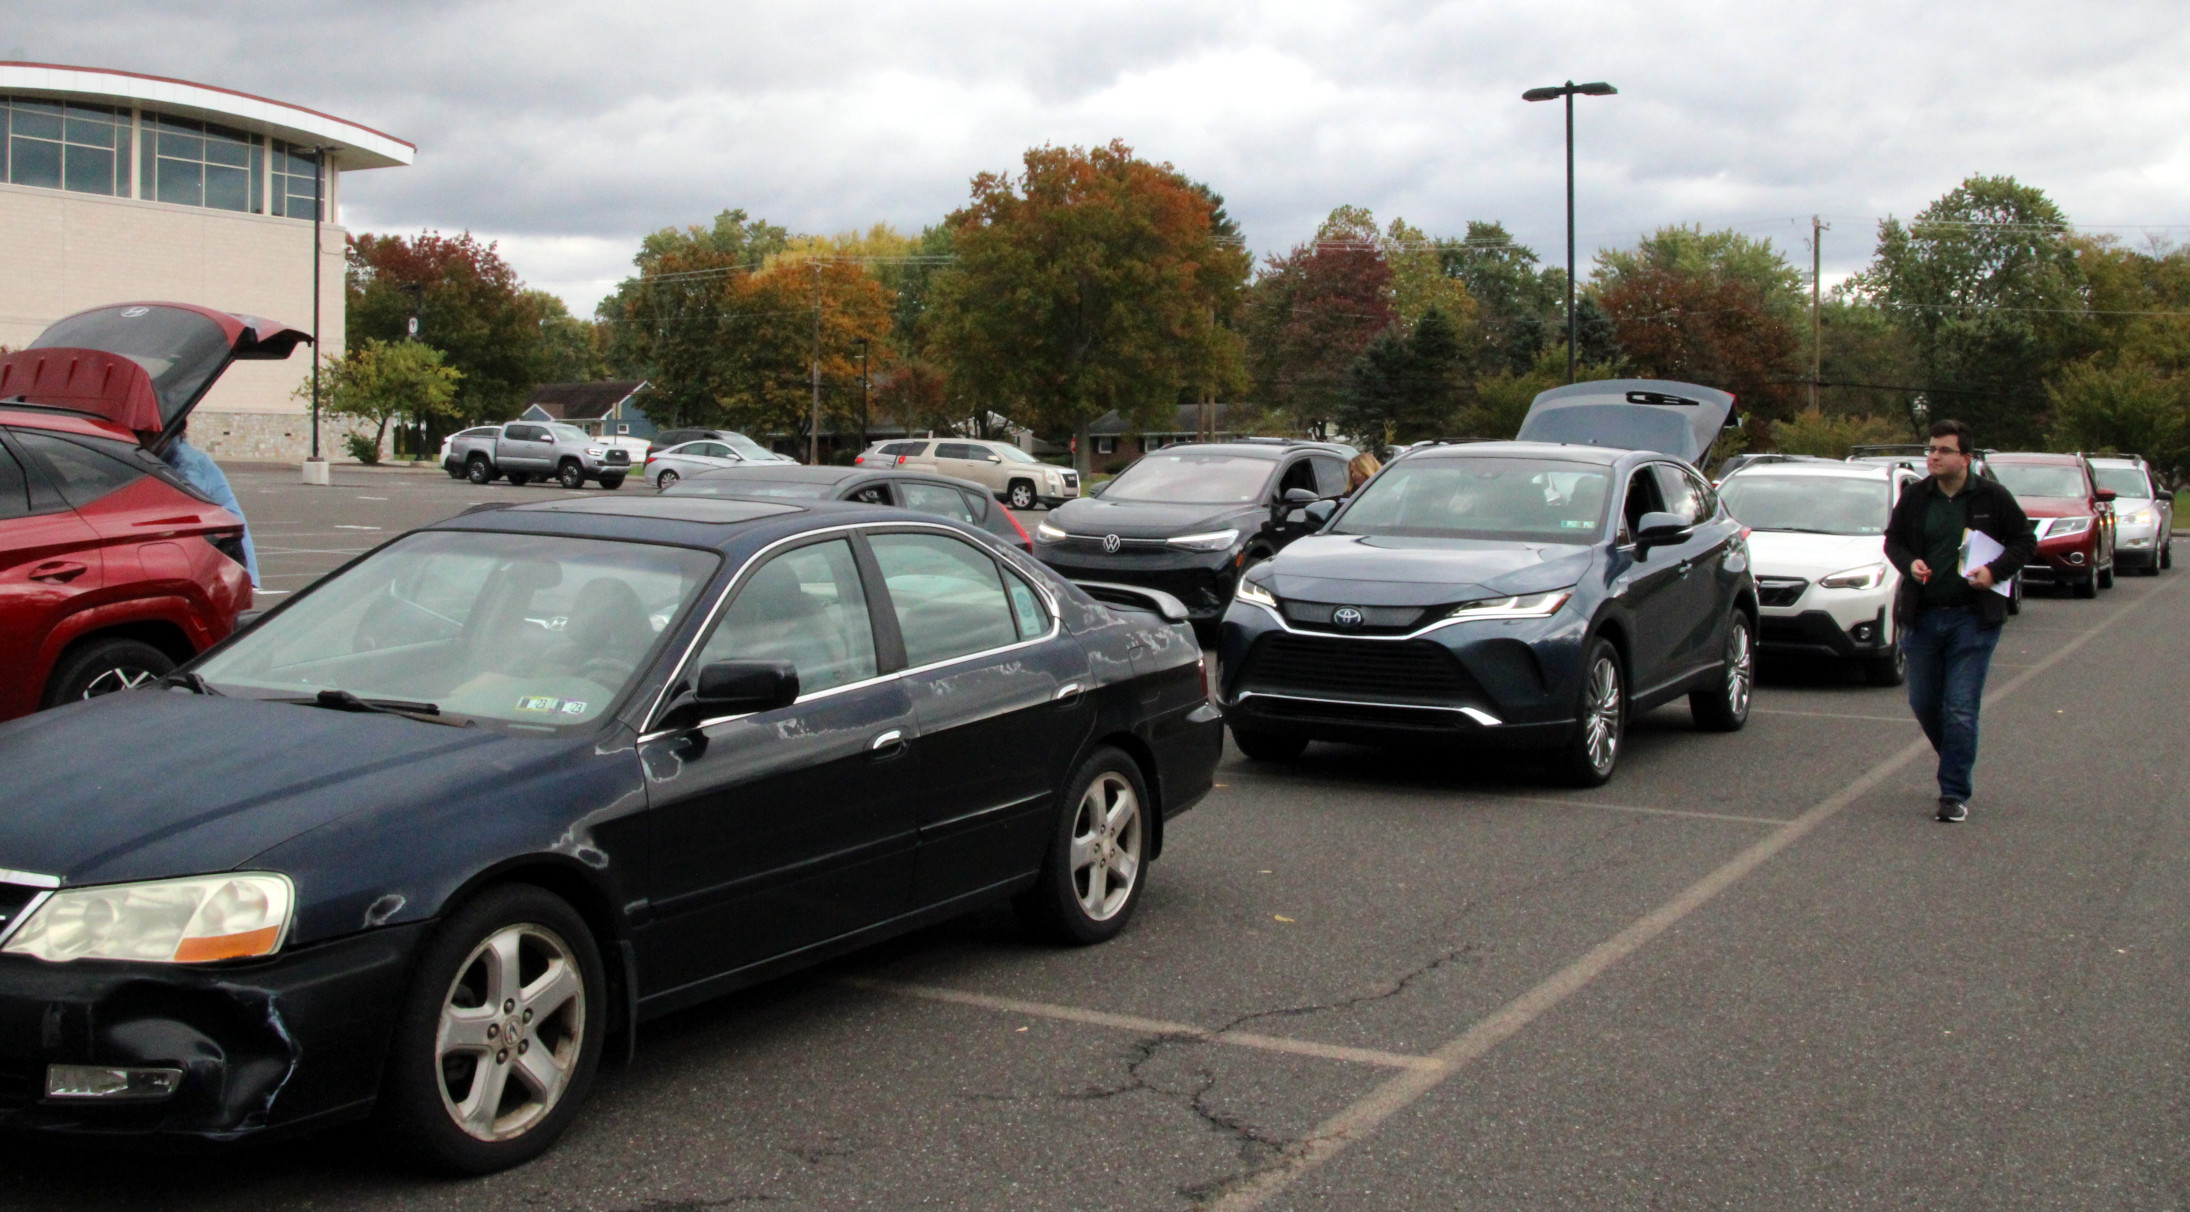 Lines of Cars Stretch Across Lot for Shredding Services